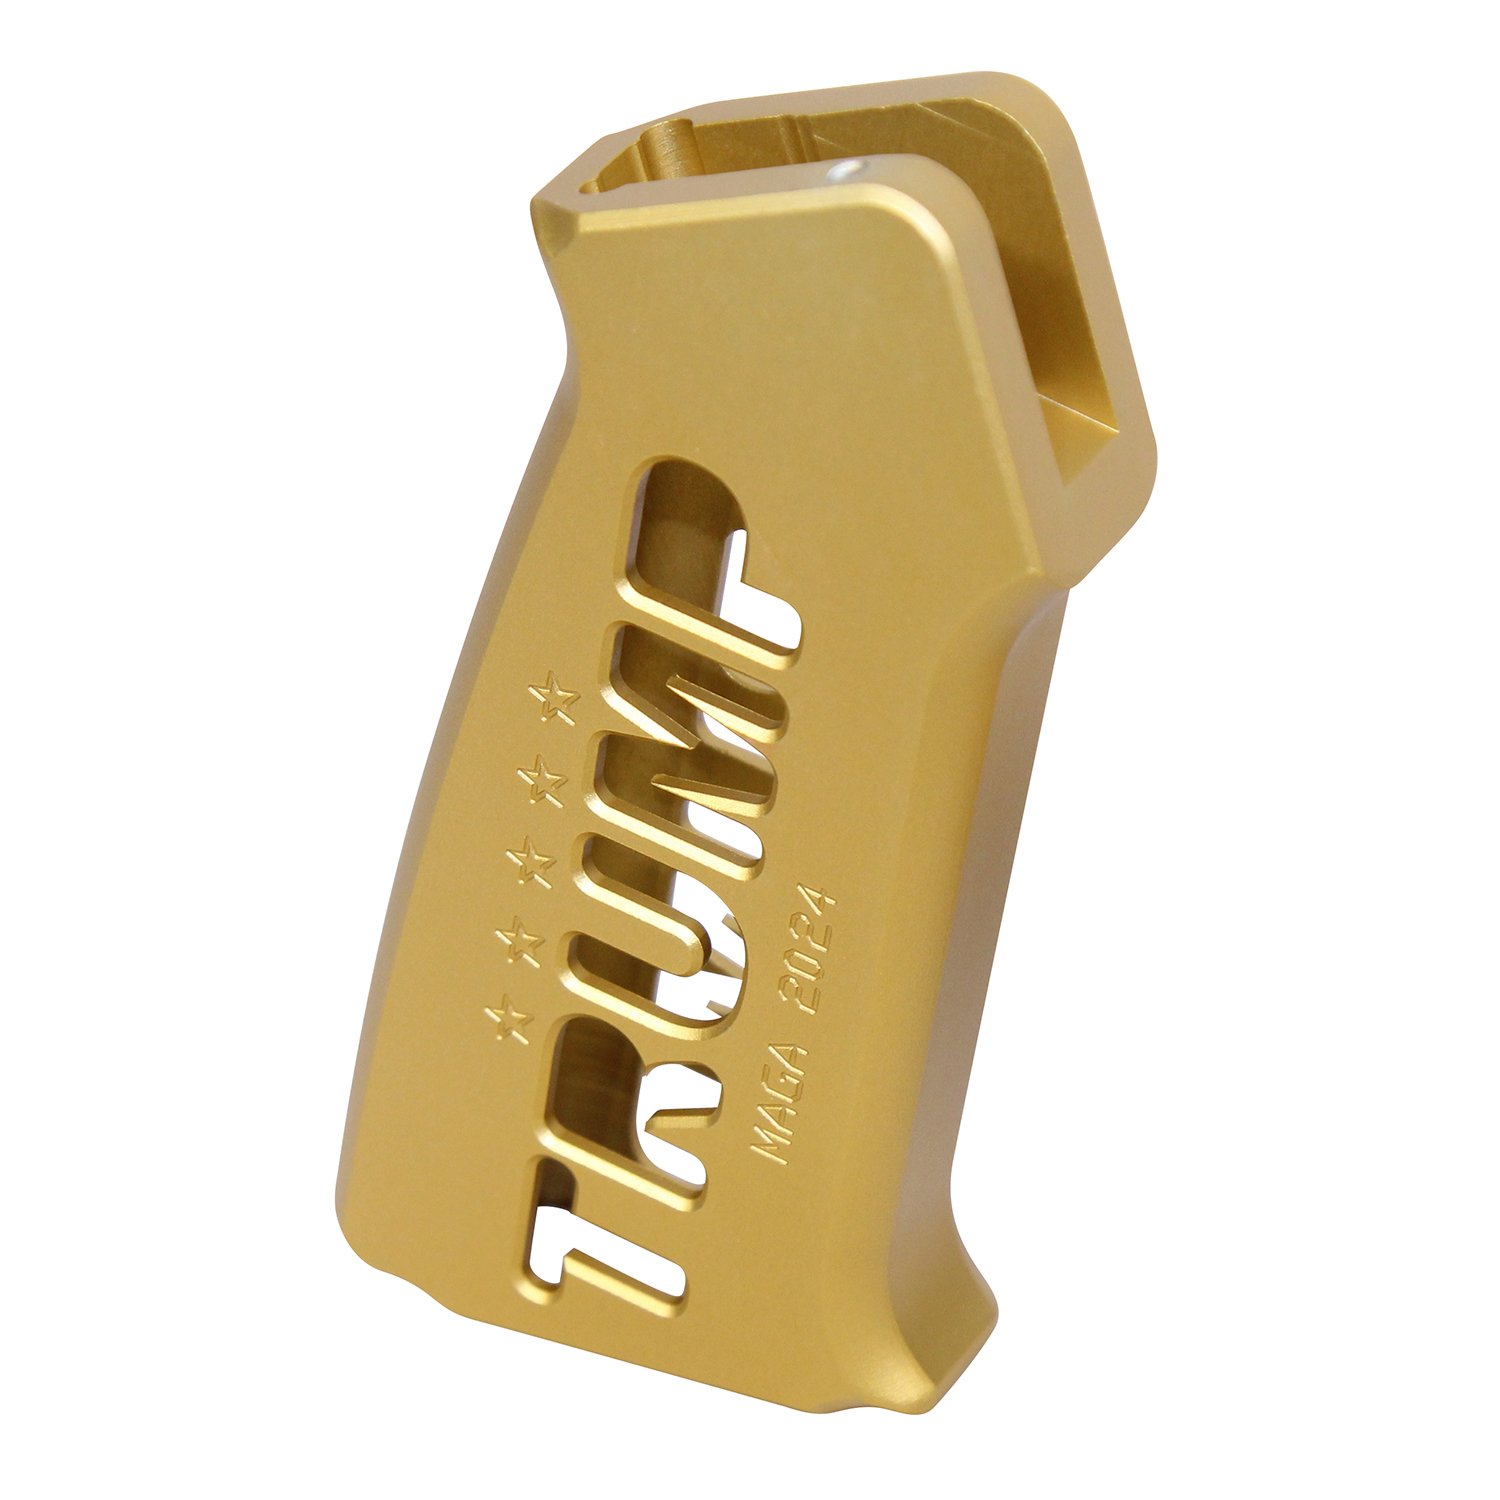 AR-15 "Trump Series" Limited Edition Pistol Grip in Anodized Gold